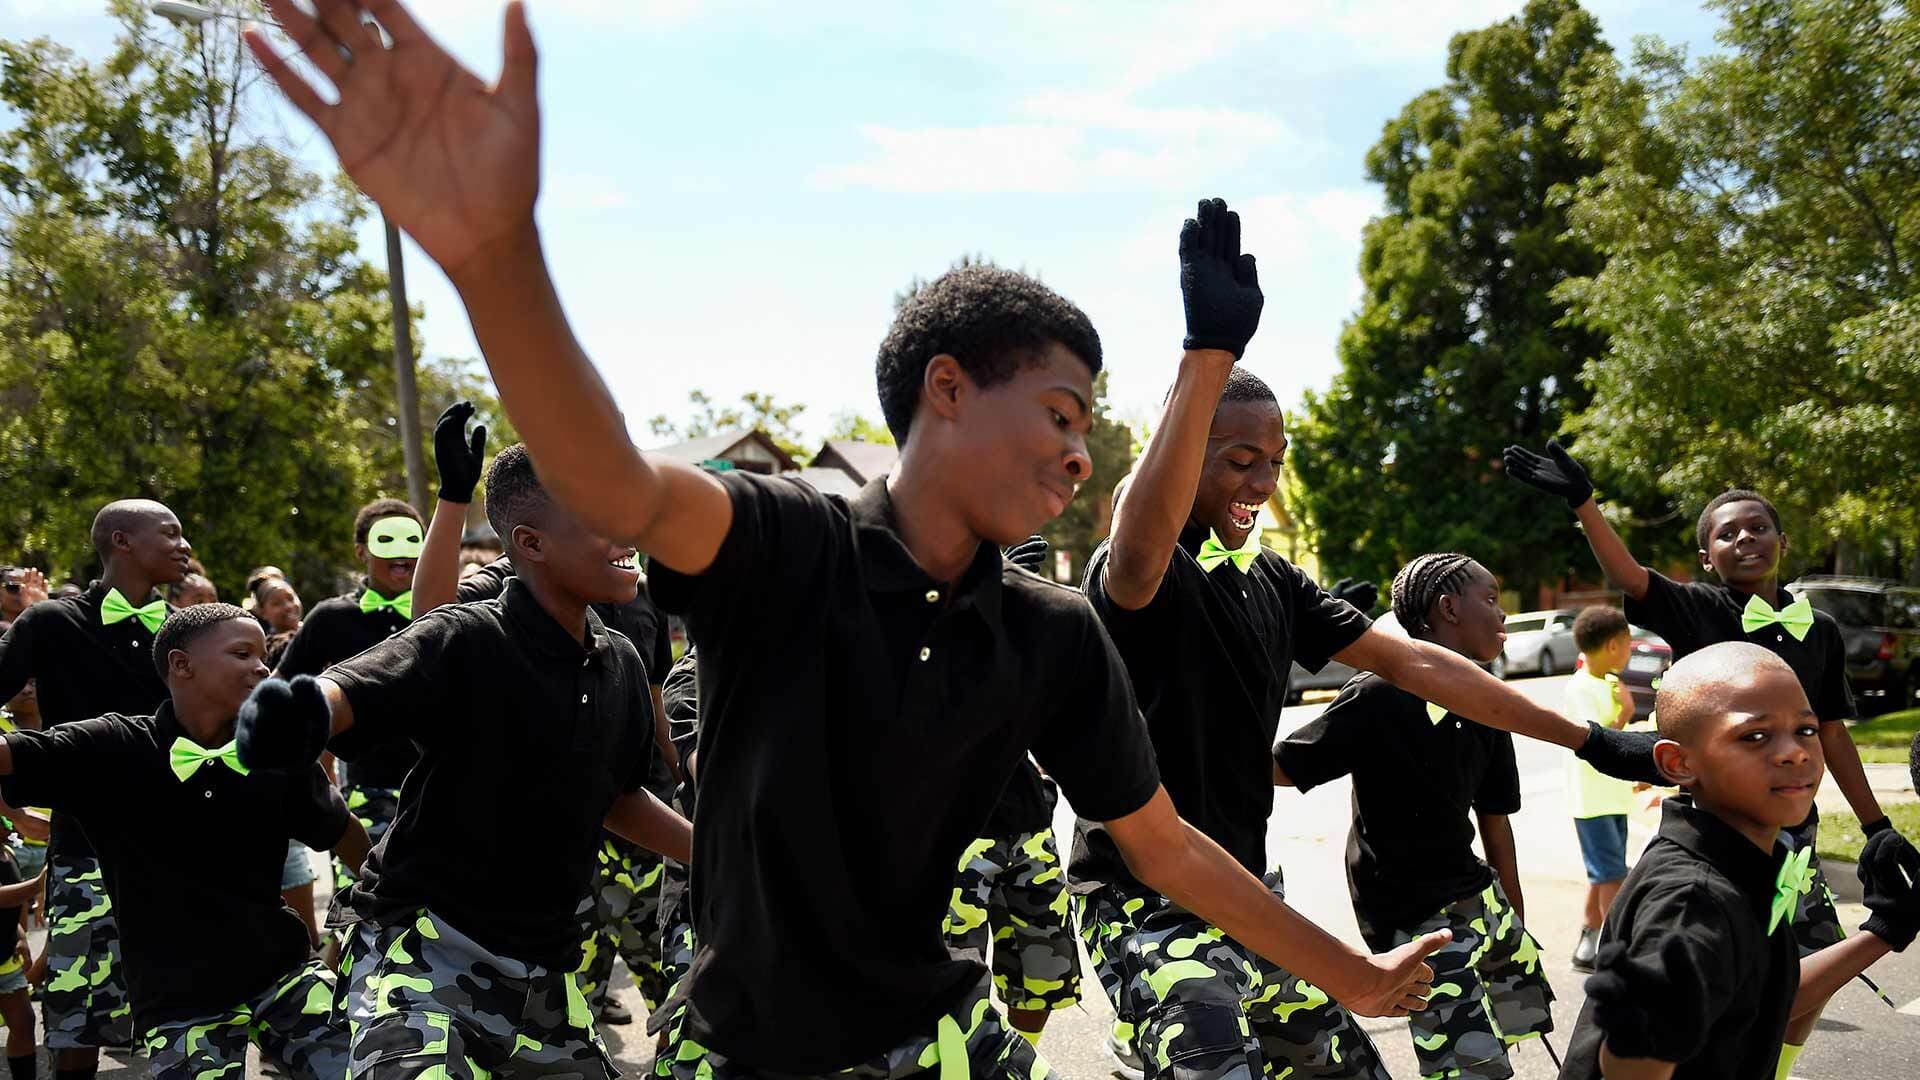 Young men dance in Juneteenth celebration parade